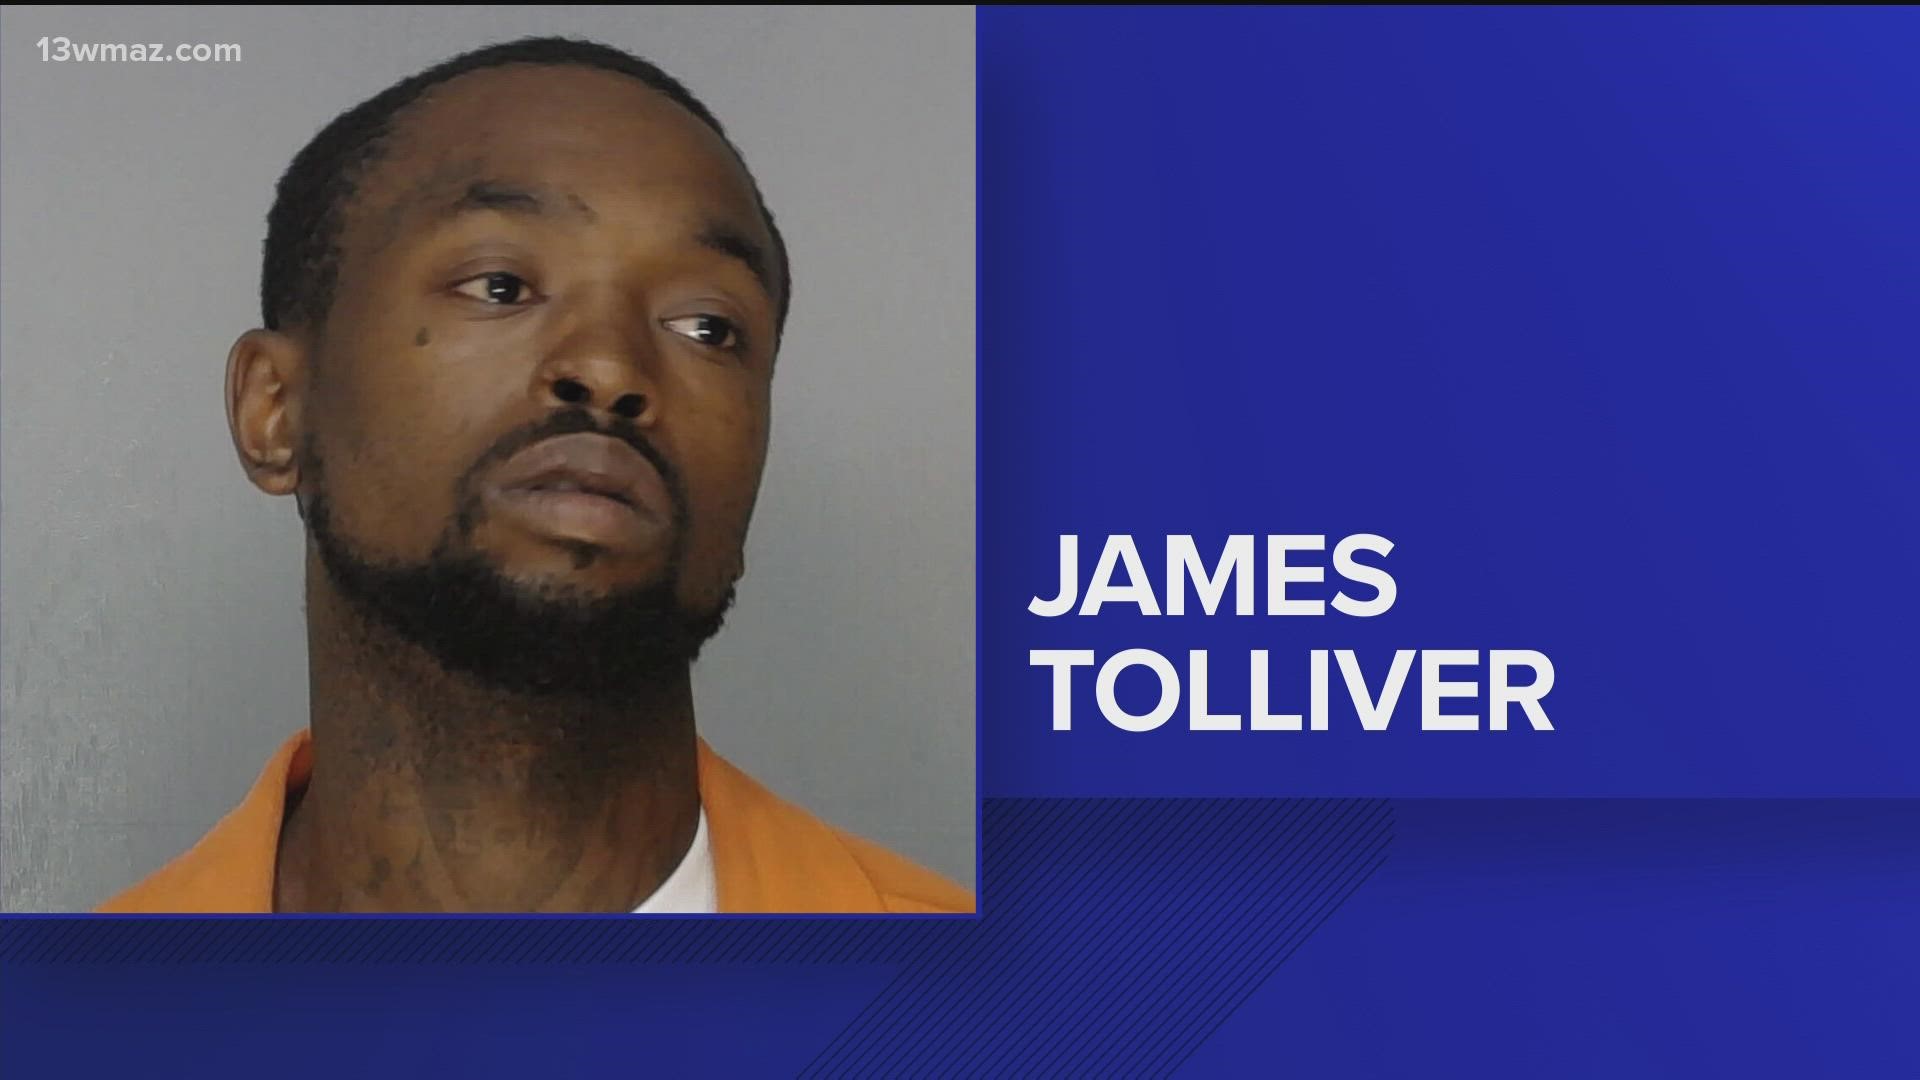 Thursday, deputies named 28-year-old James Hotdric Tolliver as one of the suspects in connection with Chatfield’s death and had a warrant issued for his arrest.